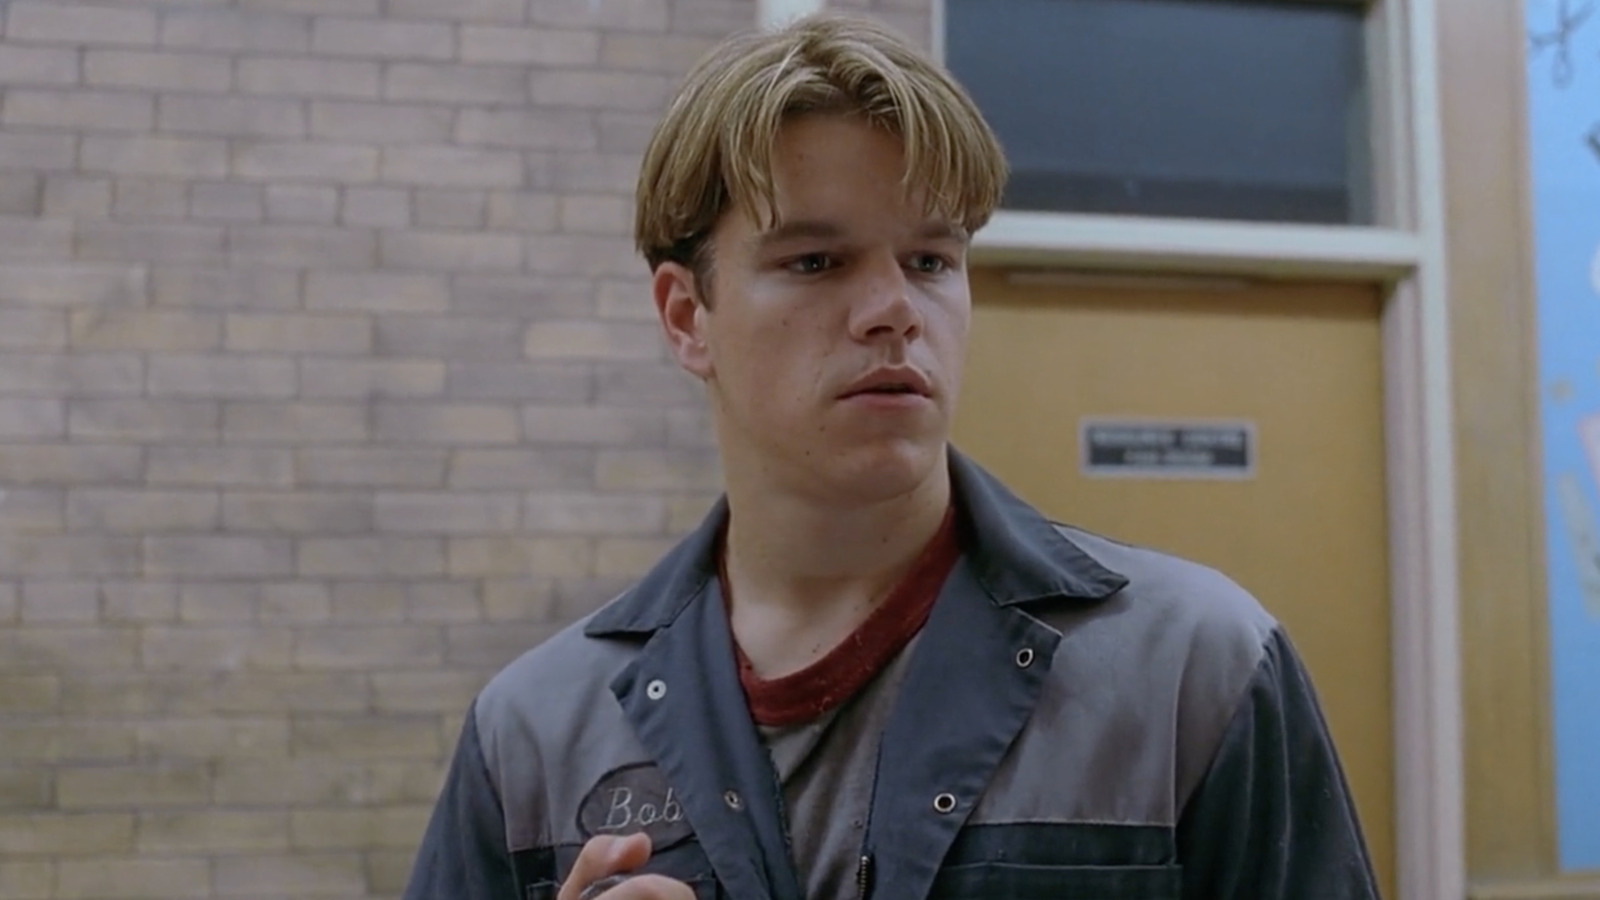 The studio’s influence prevented “Good Will Hunting” from becoming an action film